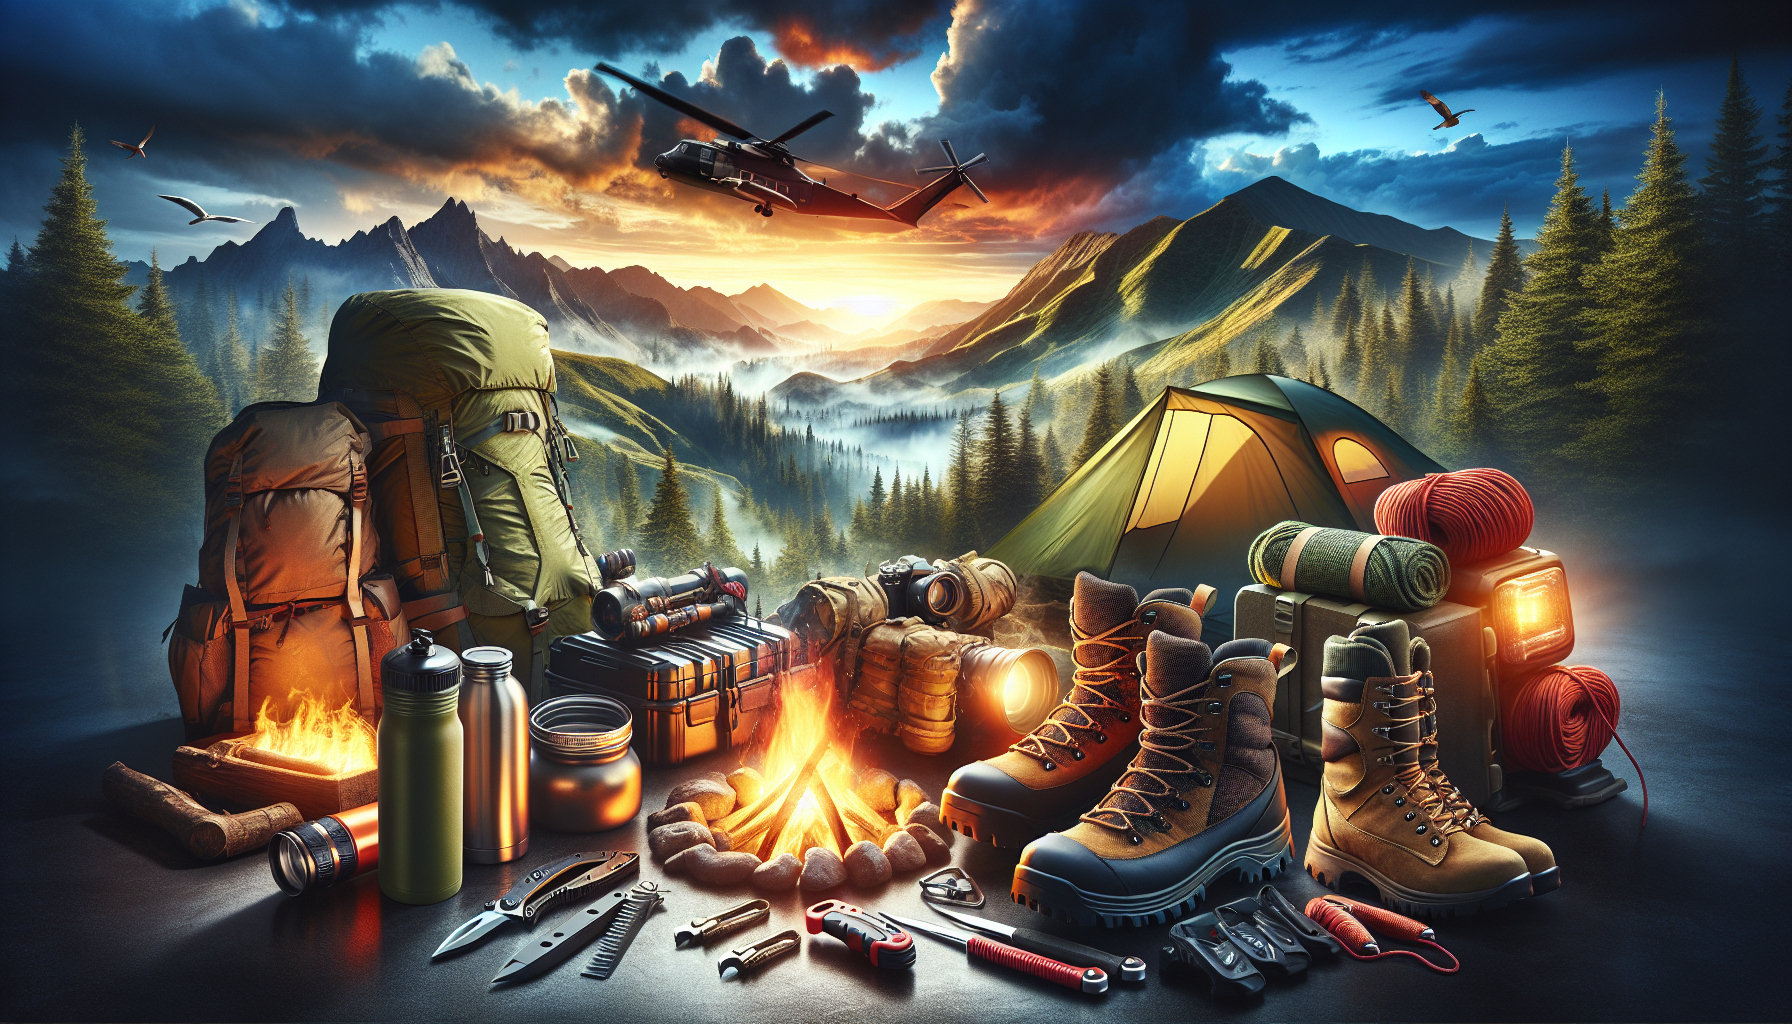 outdoor survival gear a guide for camping in the wilderness 4